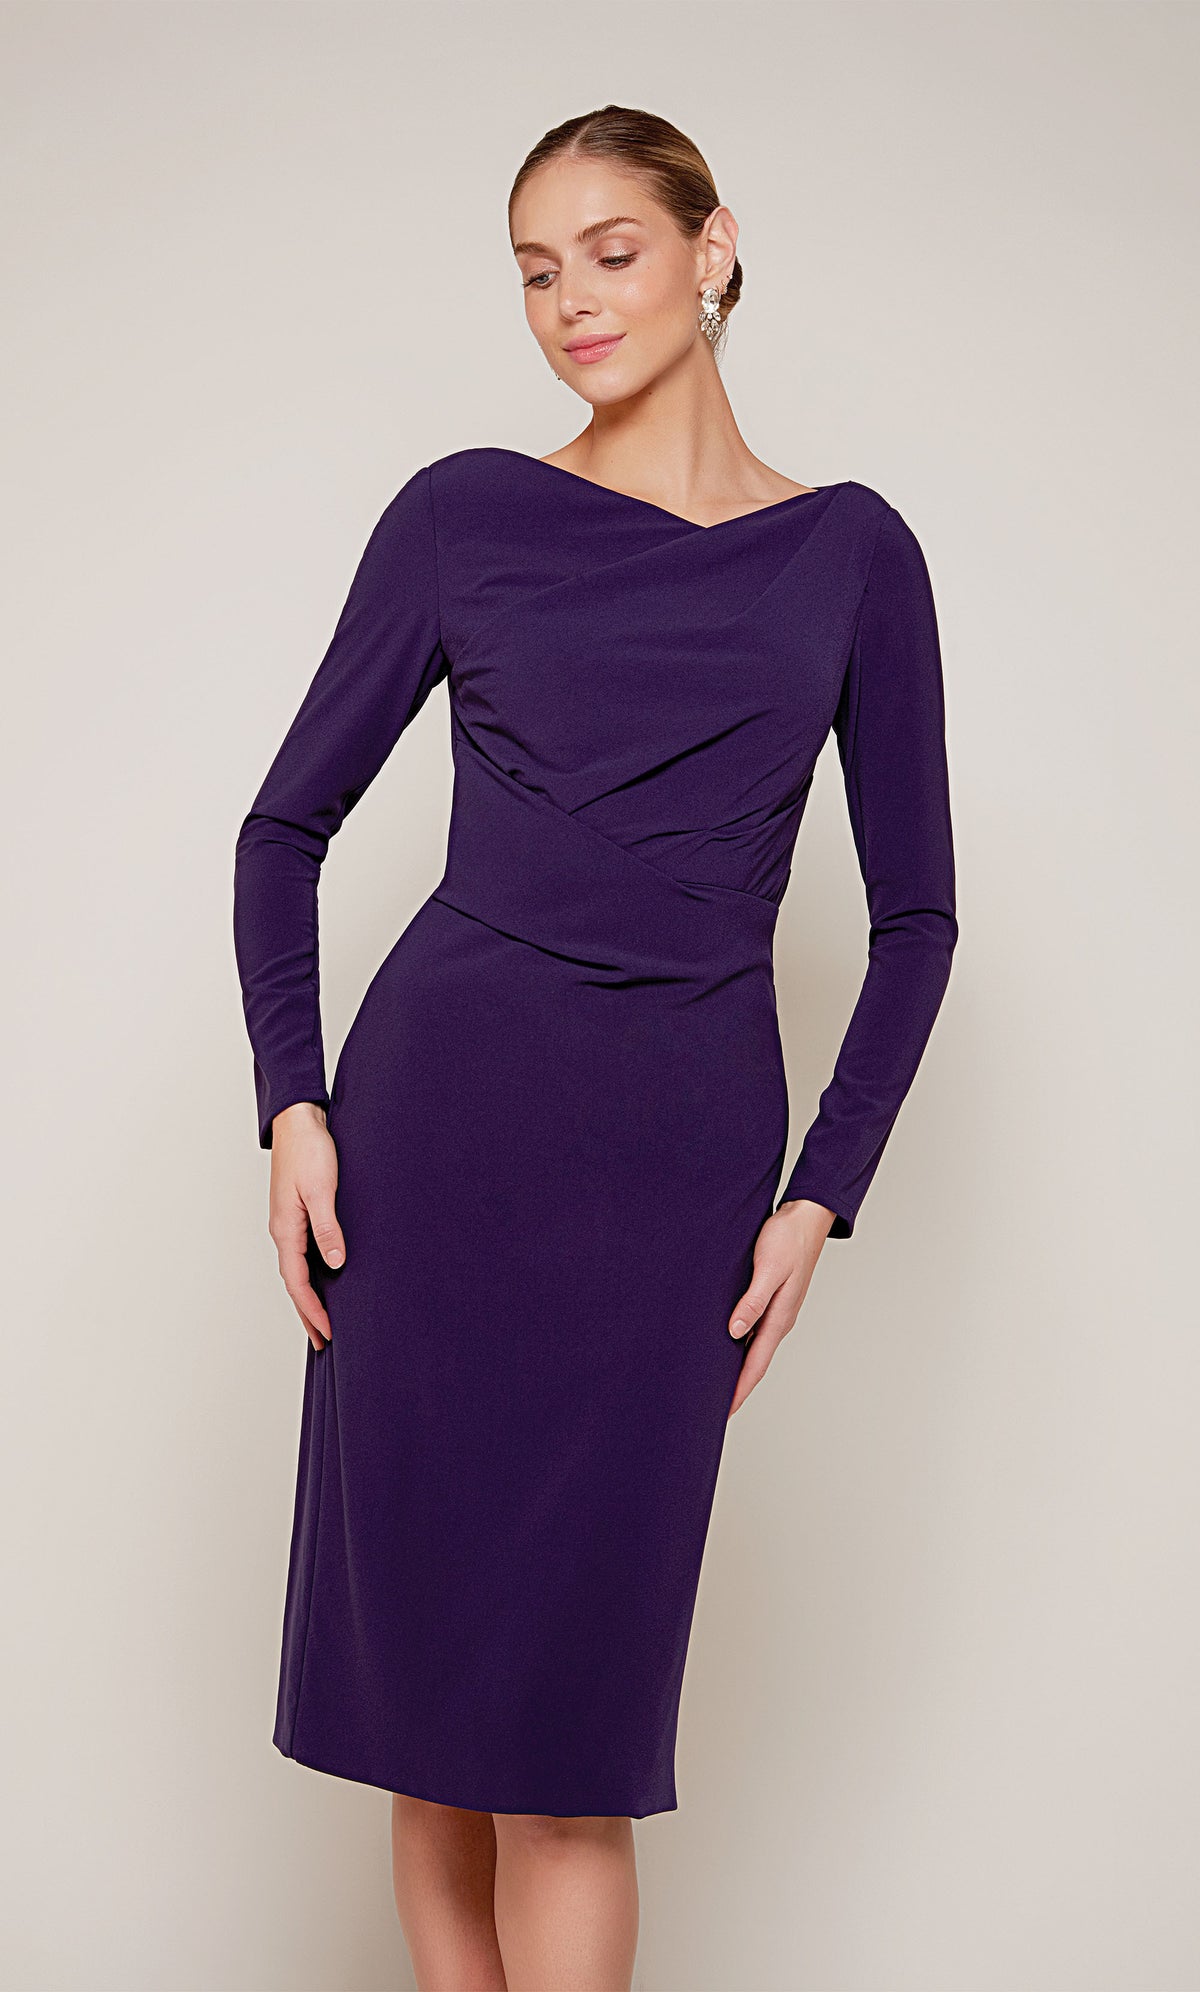 A knee length cocktail dress with long sleeves and an off center V-neckline in dark purple.